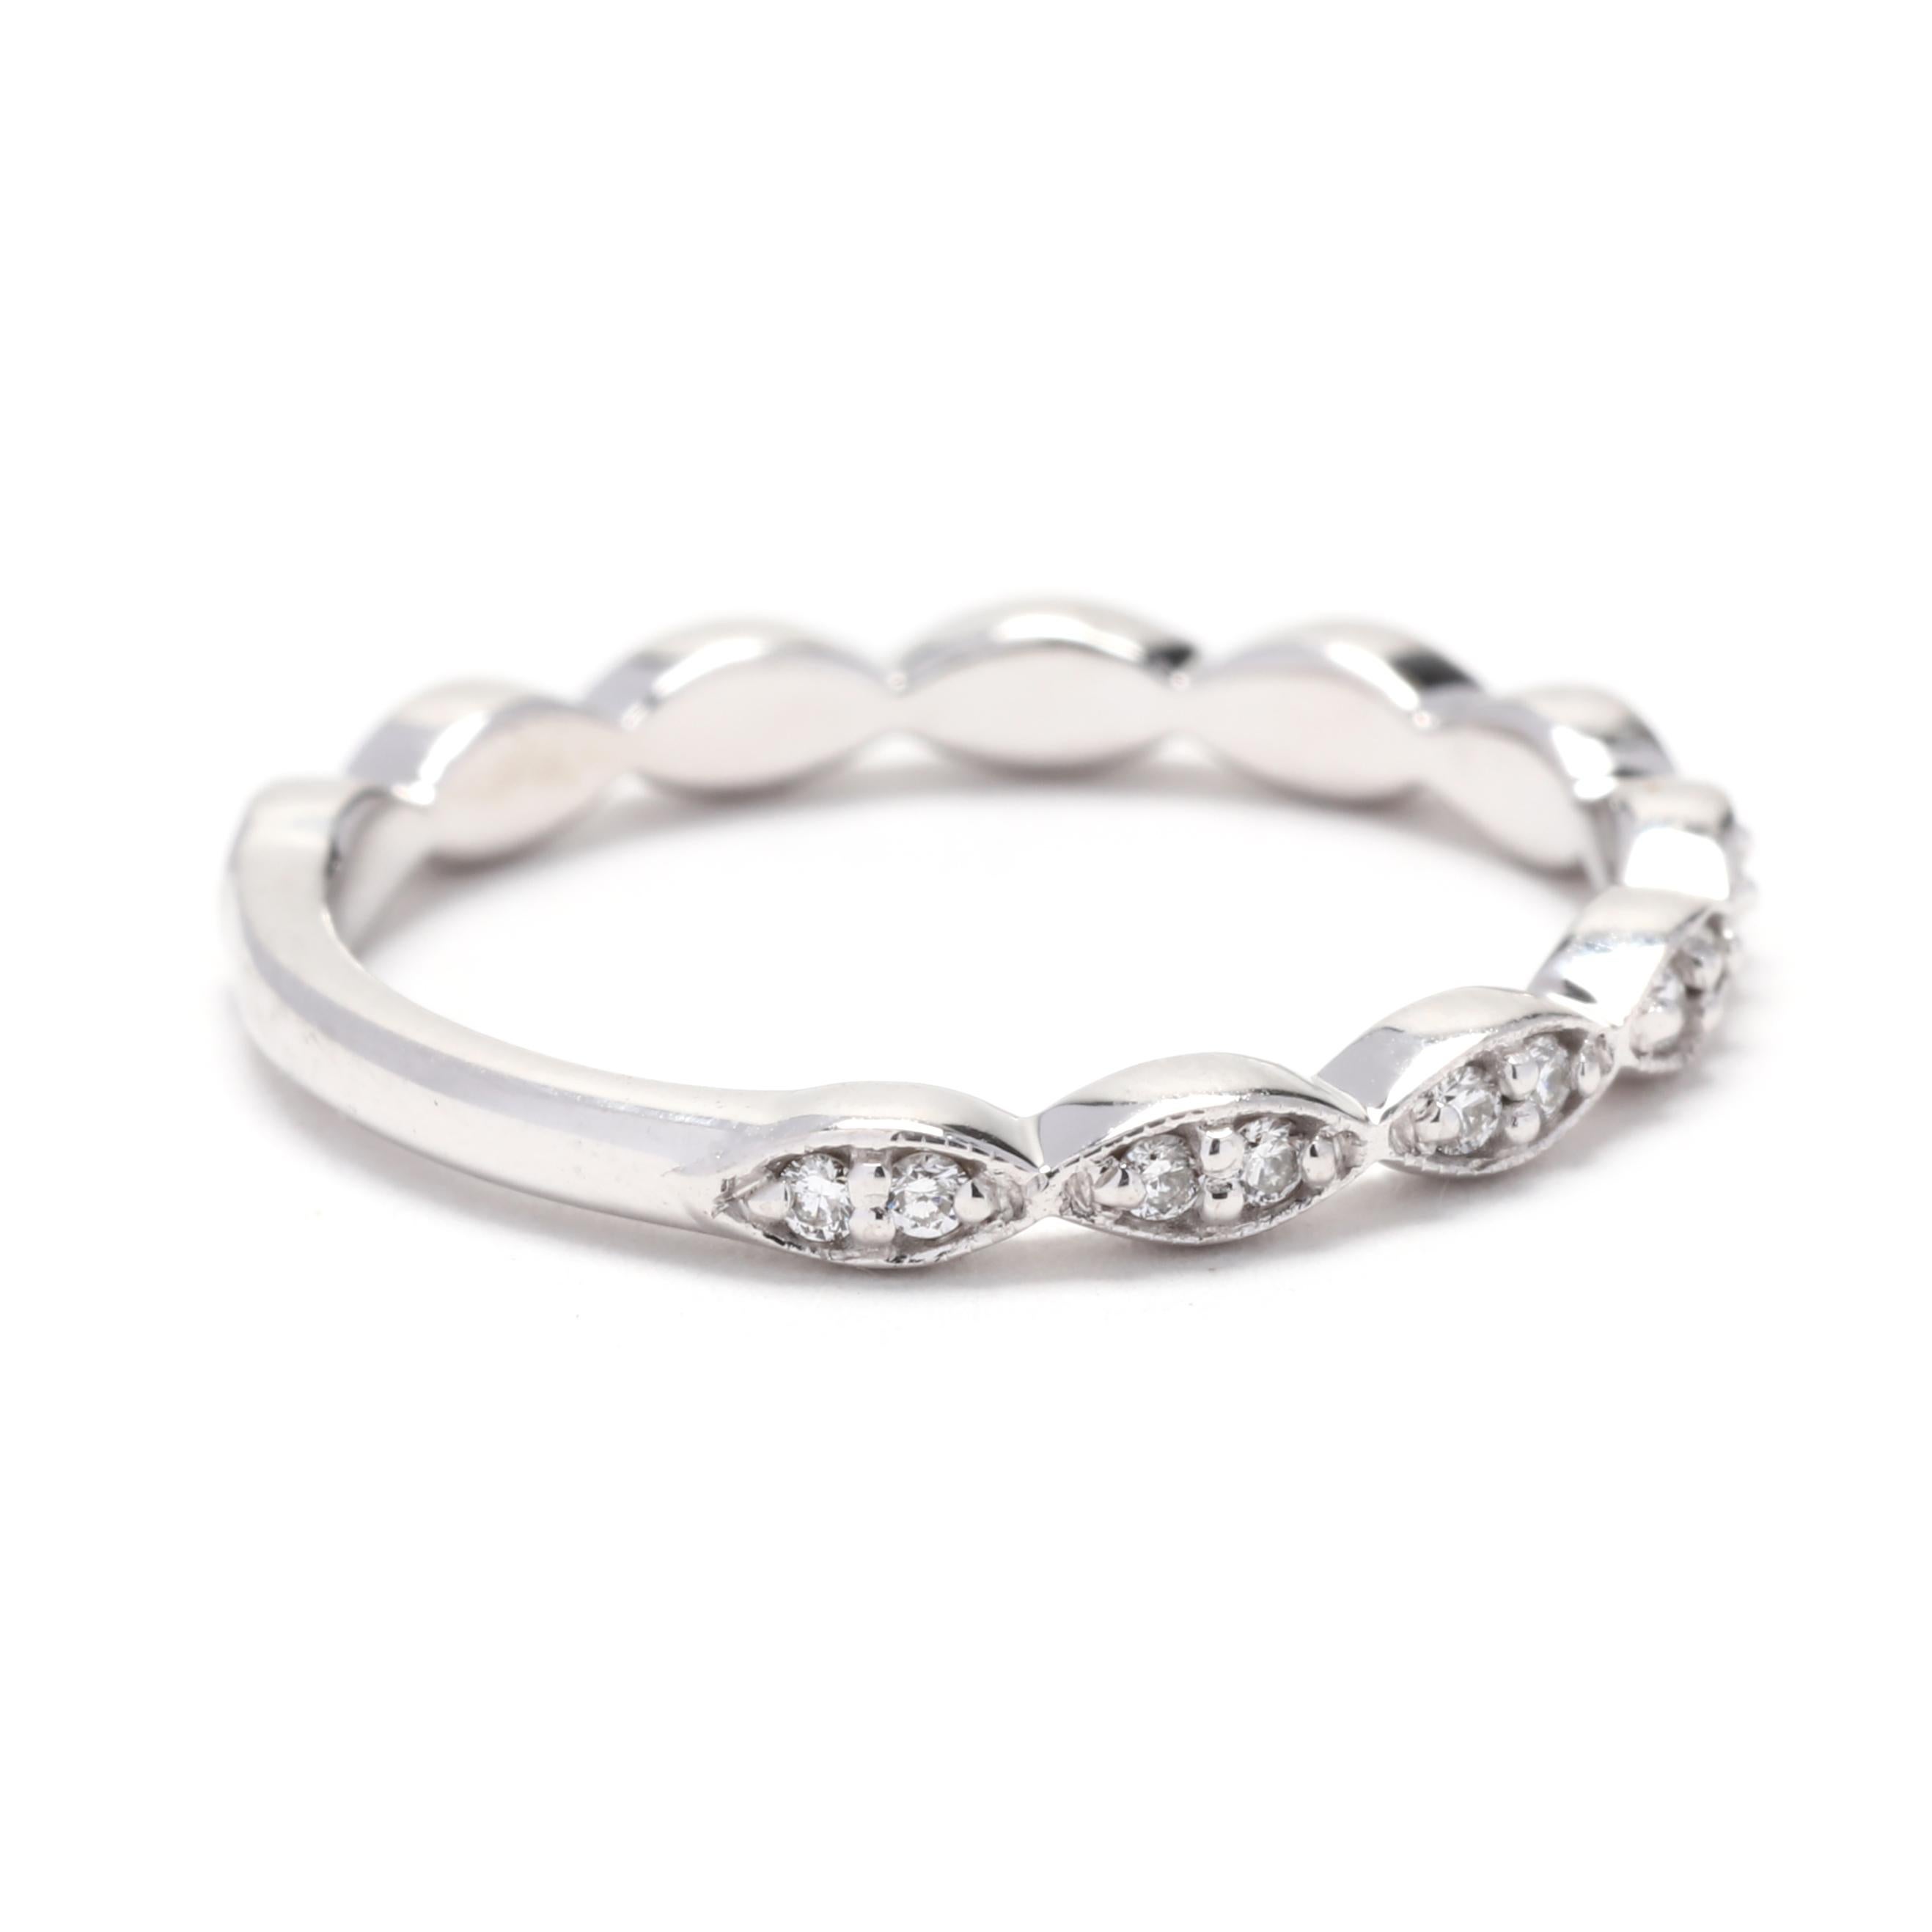 This diamond scalloped wedding band is a beautiful addition to any bridal set. Crafted in 14K white gold, it features a total carat weight of 0.20ctw of round cut diamonds. The scalloped design of the band creates a delicate and feminine look. The